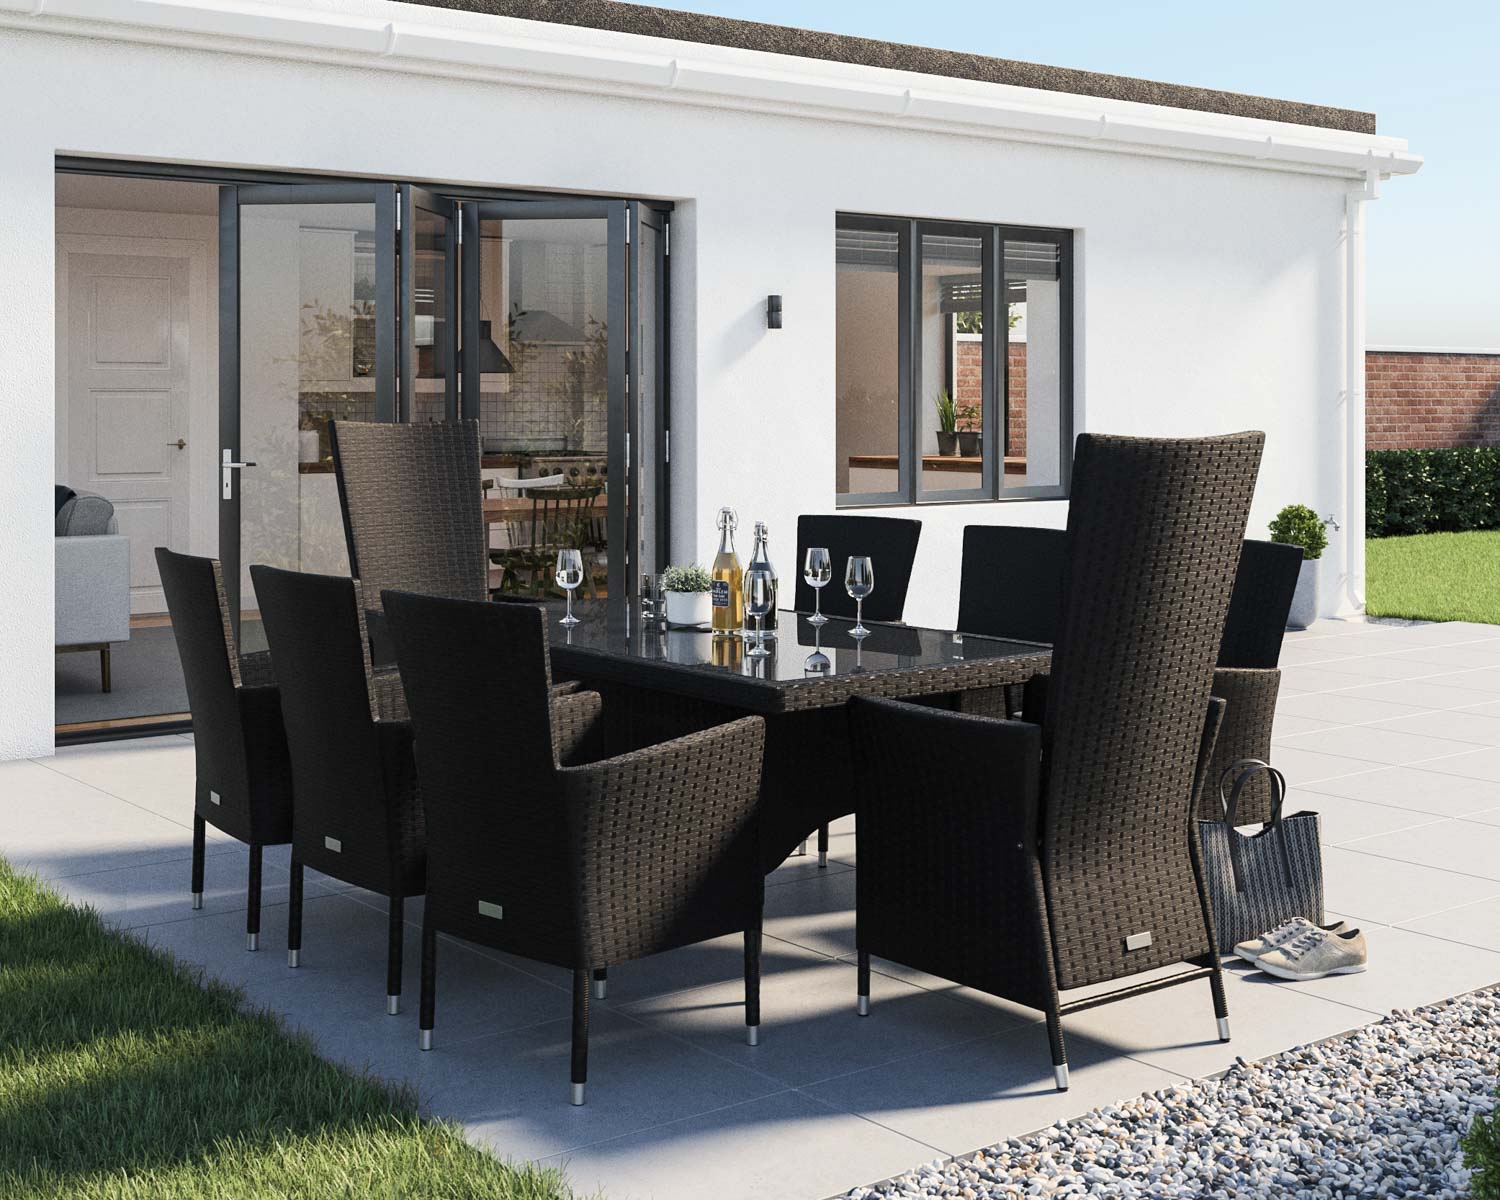 Rectangular Rattan Garden Dining Table Set With 8 Chairs In Black Amp White Cambridge Rattan Direct